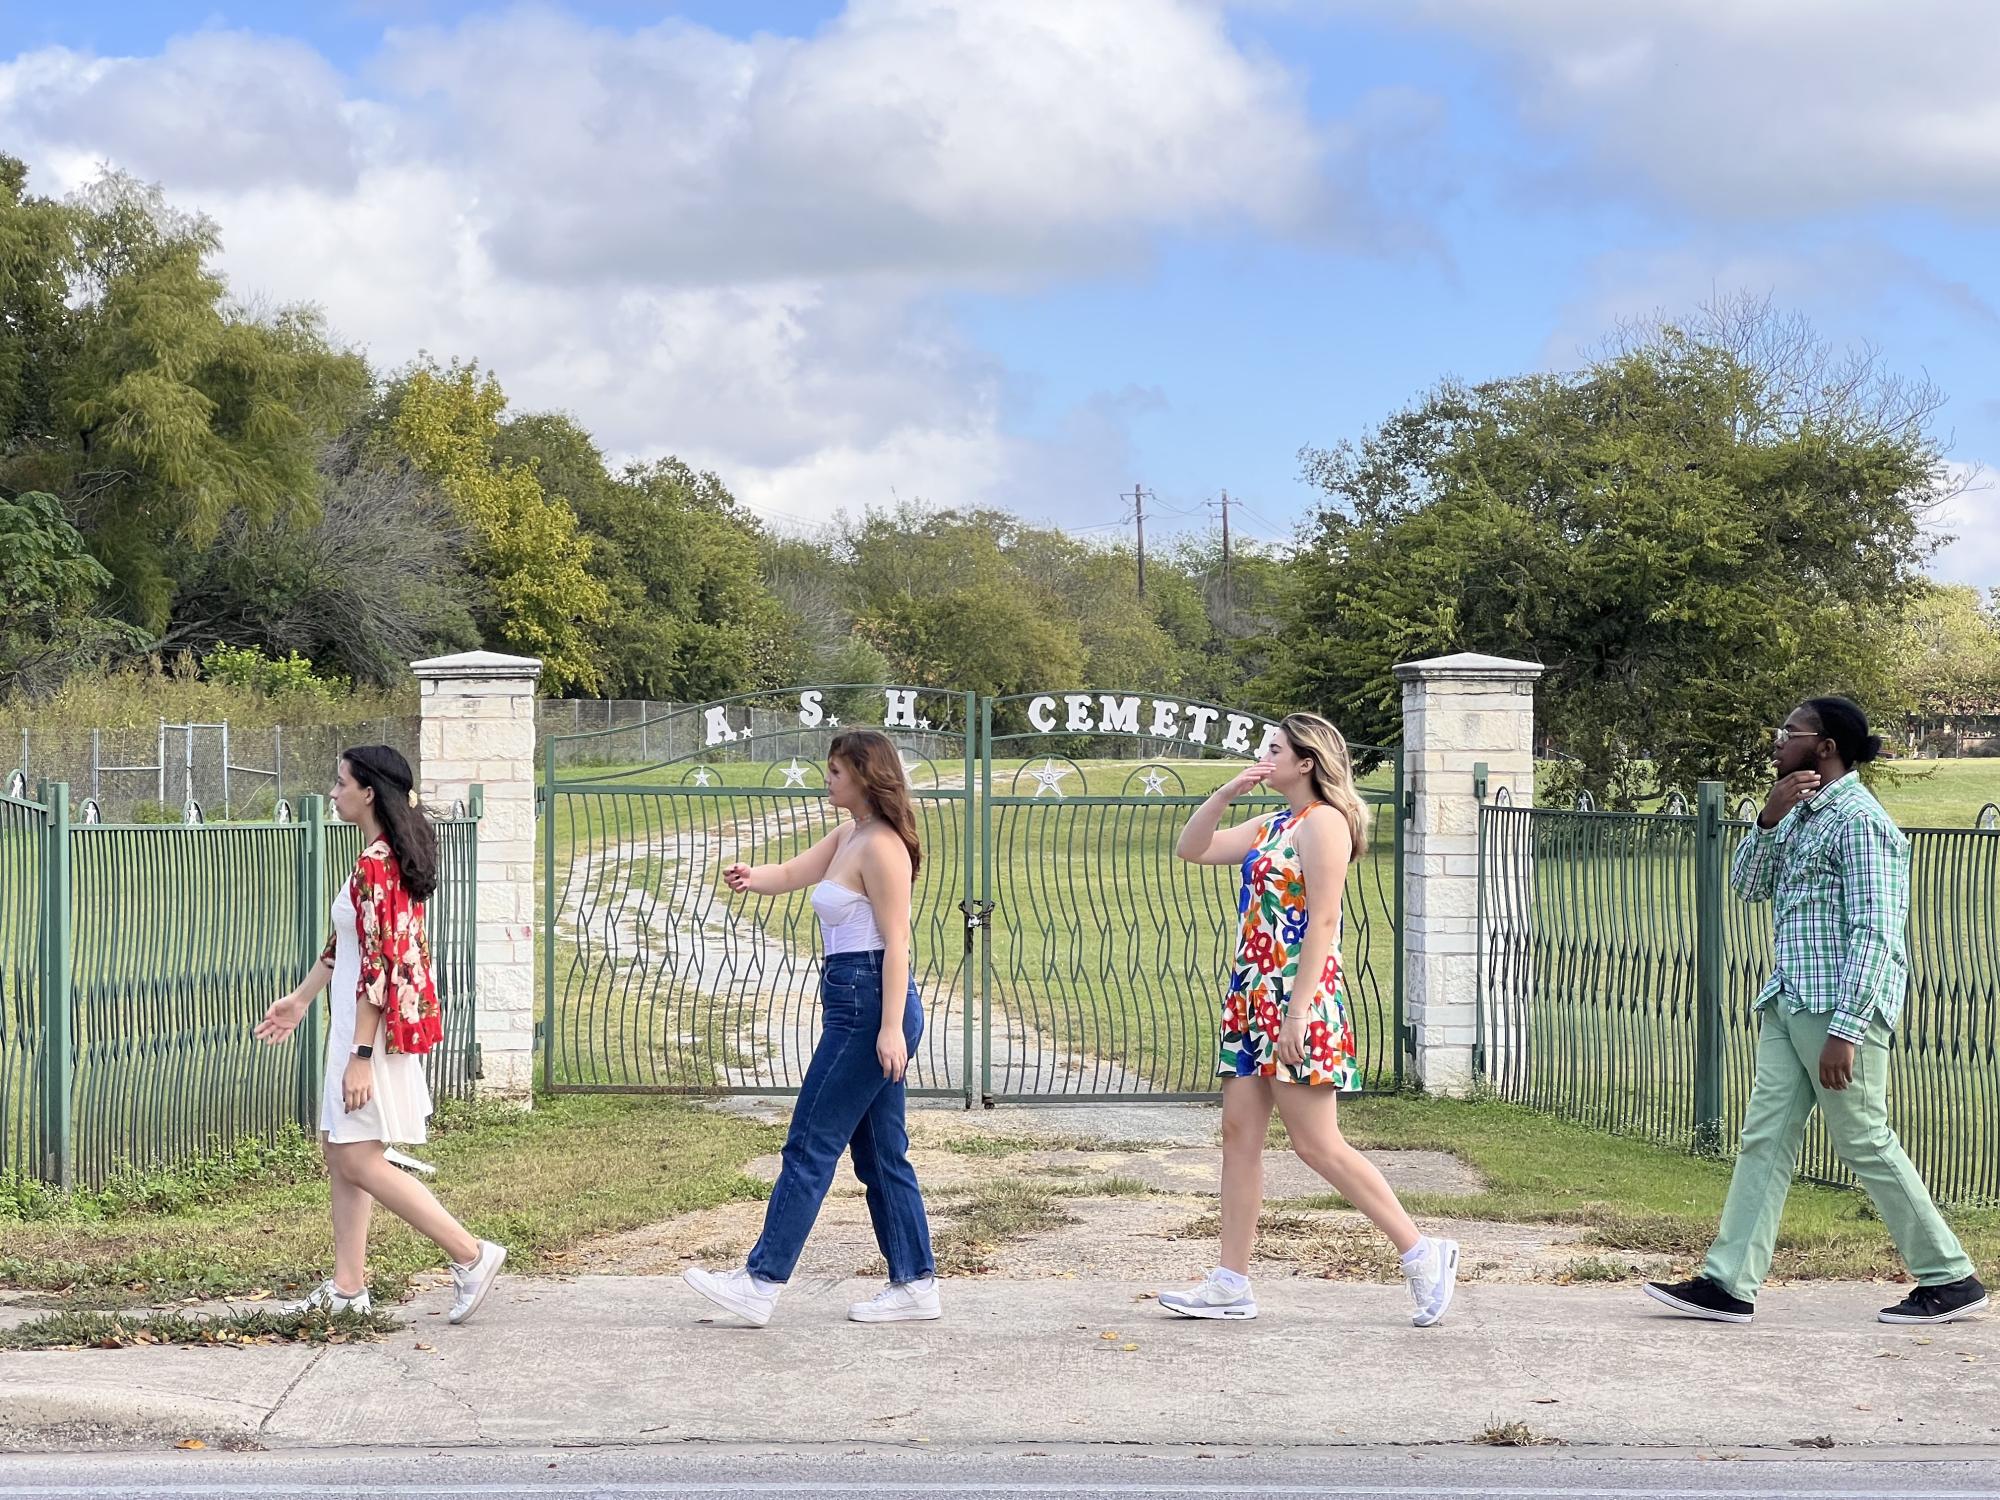 four ensemble members walk in a line in front of the gates for the A.S.H. Cemetery